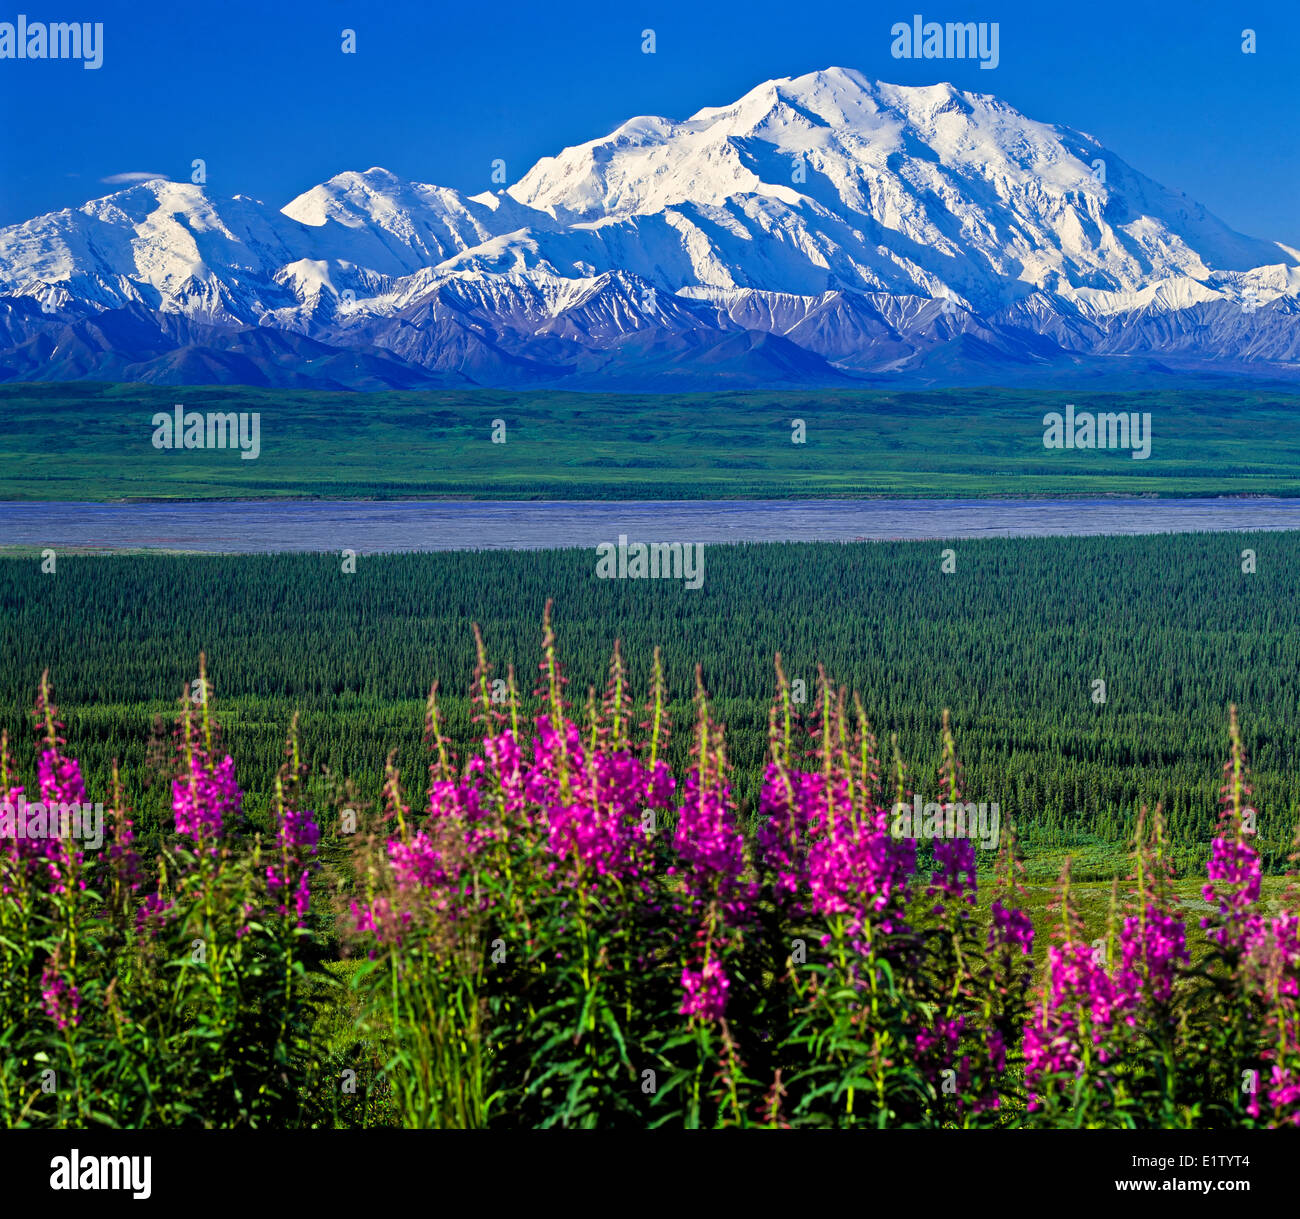 Mount McKinley (Denali) on a clear blue sky day with fireweed in the foreground overlooking a glacier river bed in early summer Stock Photo